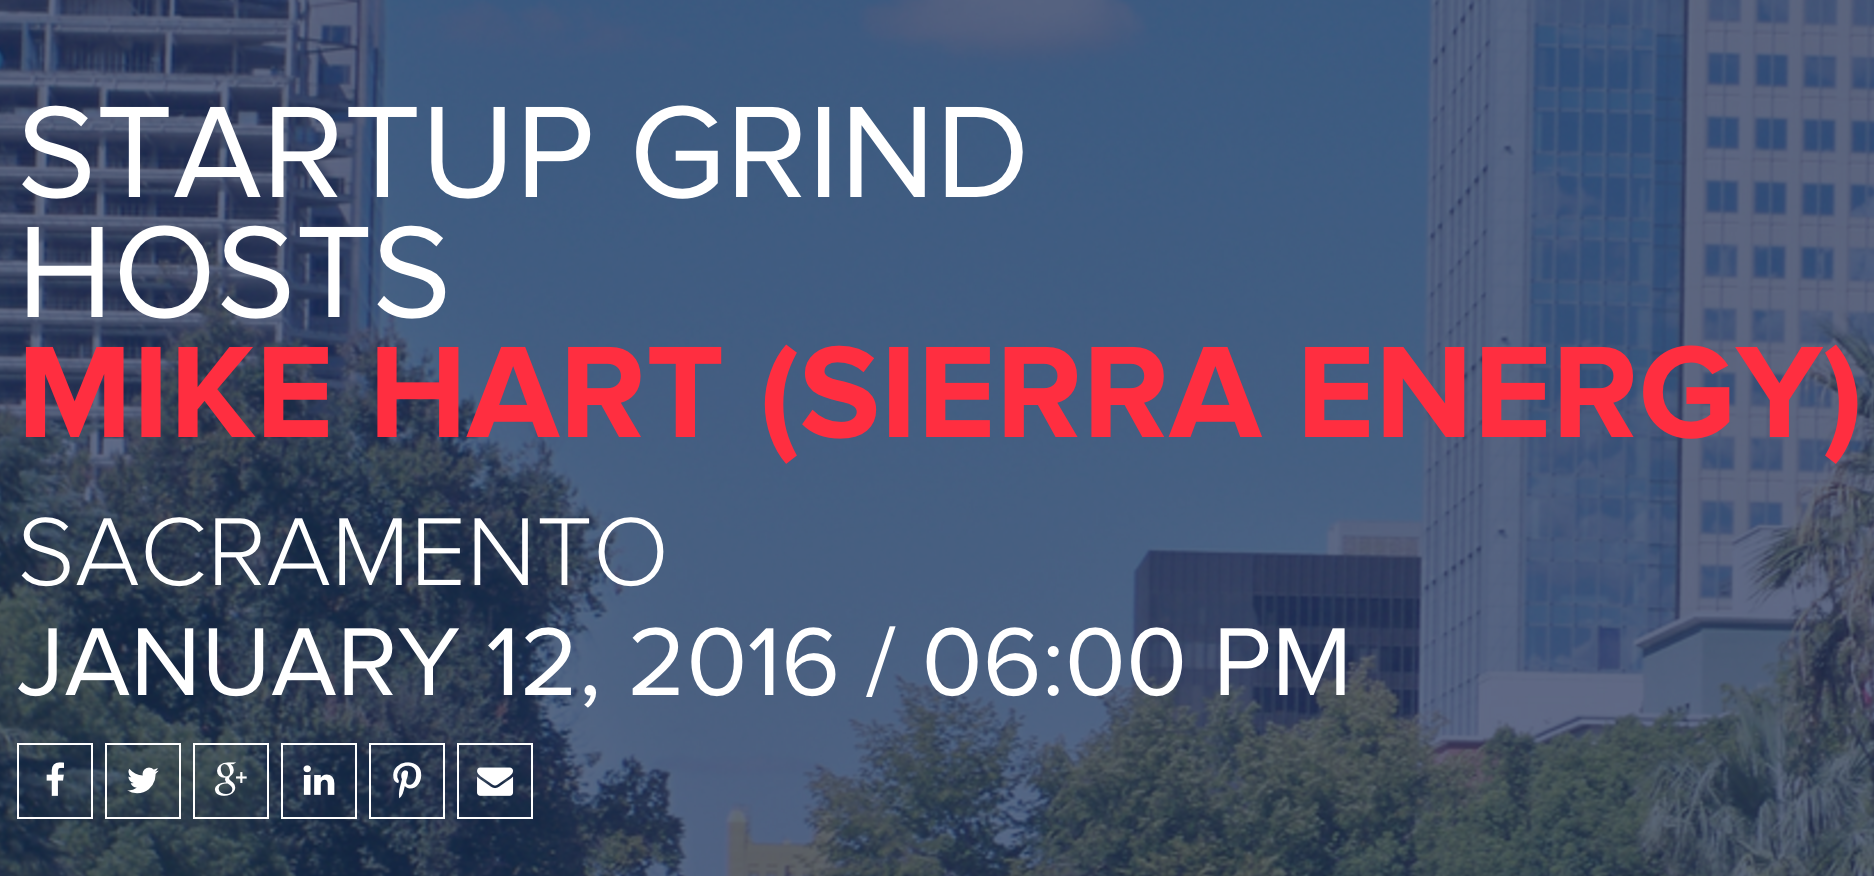 Startup Grind Hosts Mike Hart on January 12